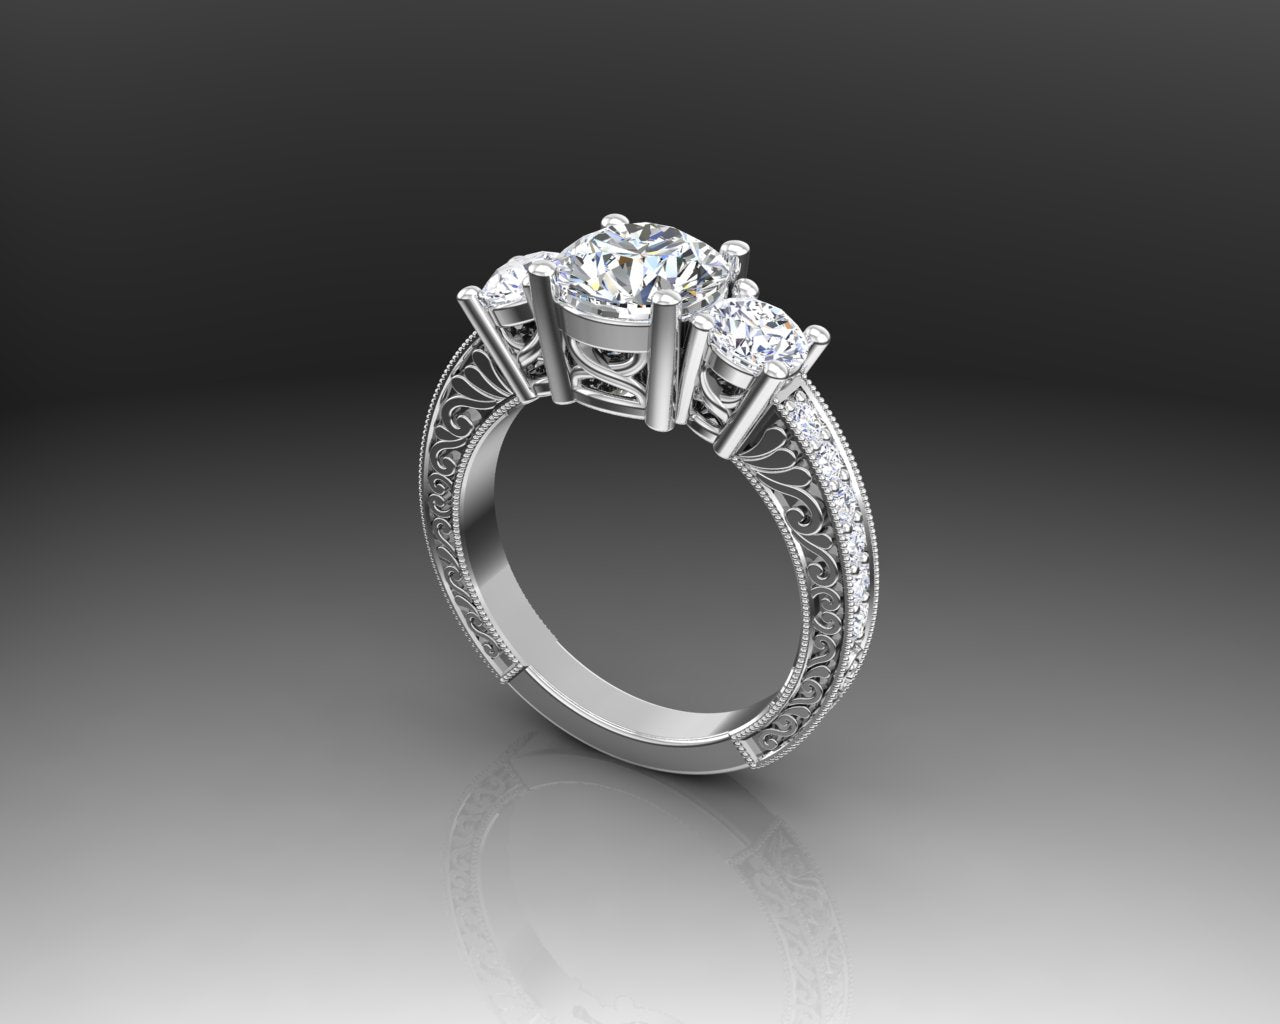 3 STONE DIAMOND ENAGAGMENT RING WITH GUARD - Reigning Jewels Fine Jewelry 